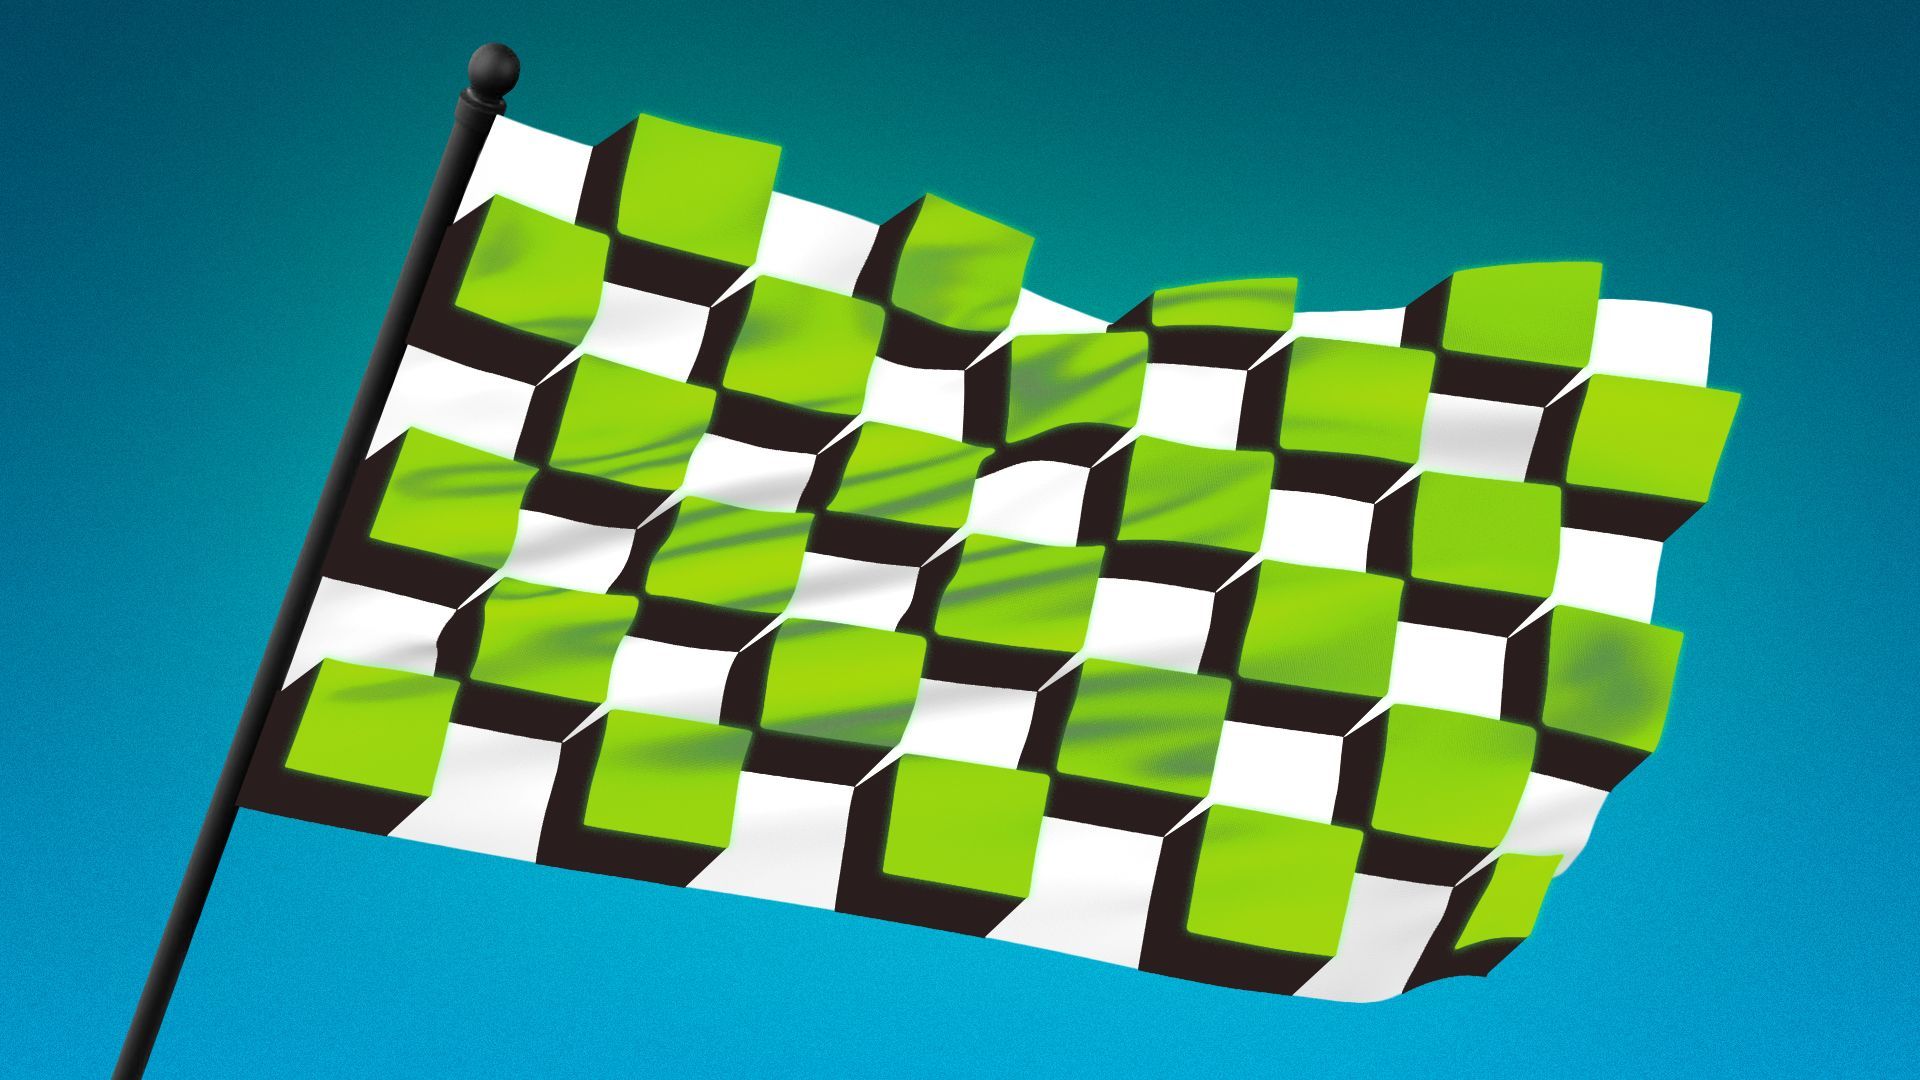 Illustration of a checkered race flag with neon green three-dimensional cubes in place of the flat black squares